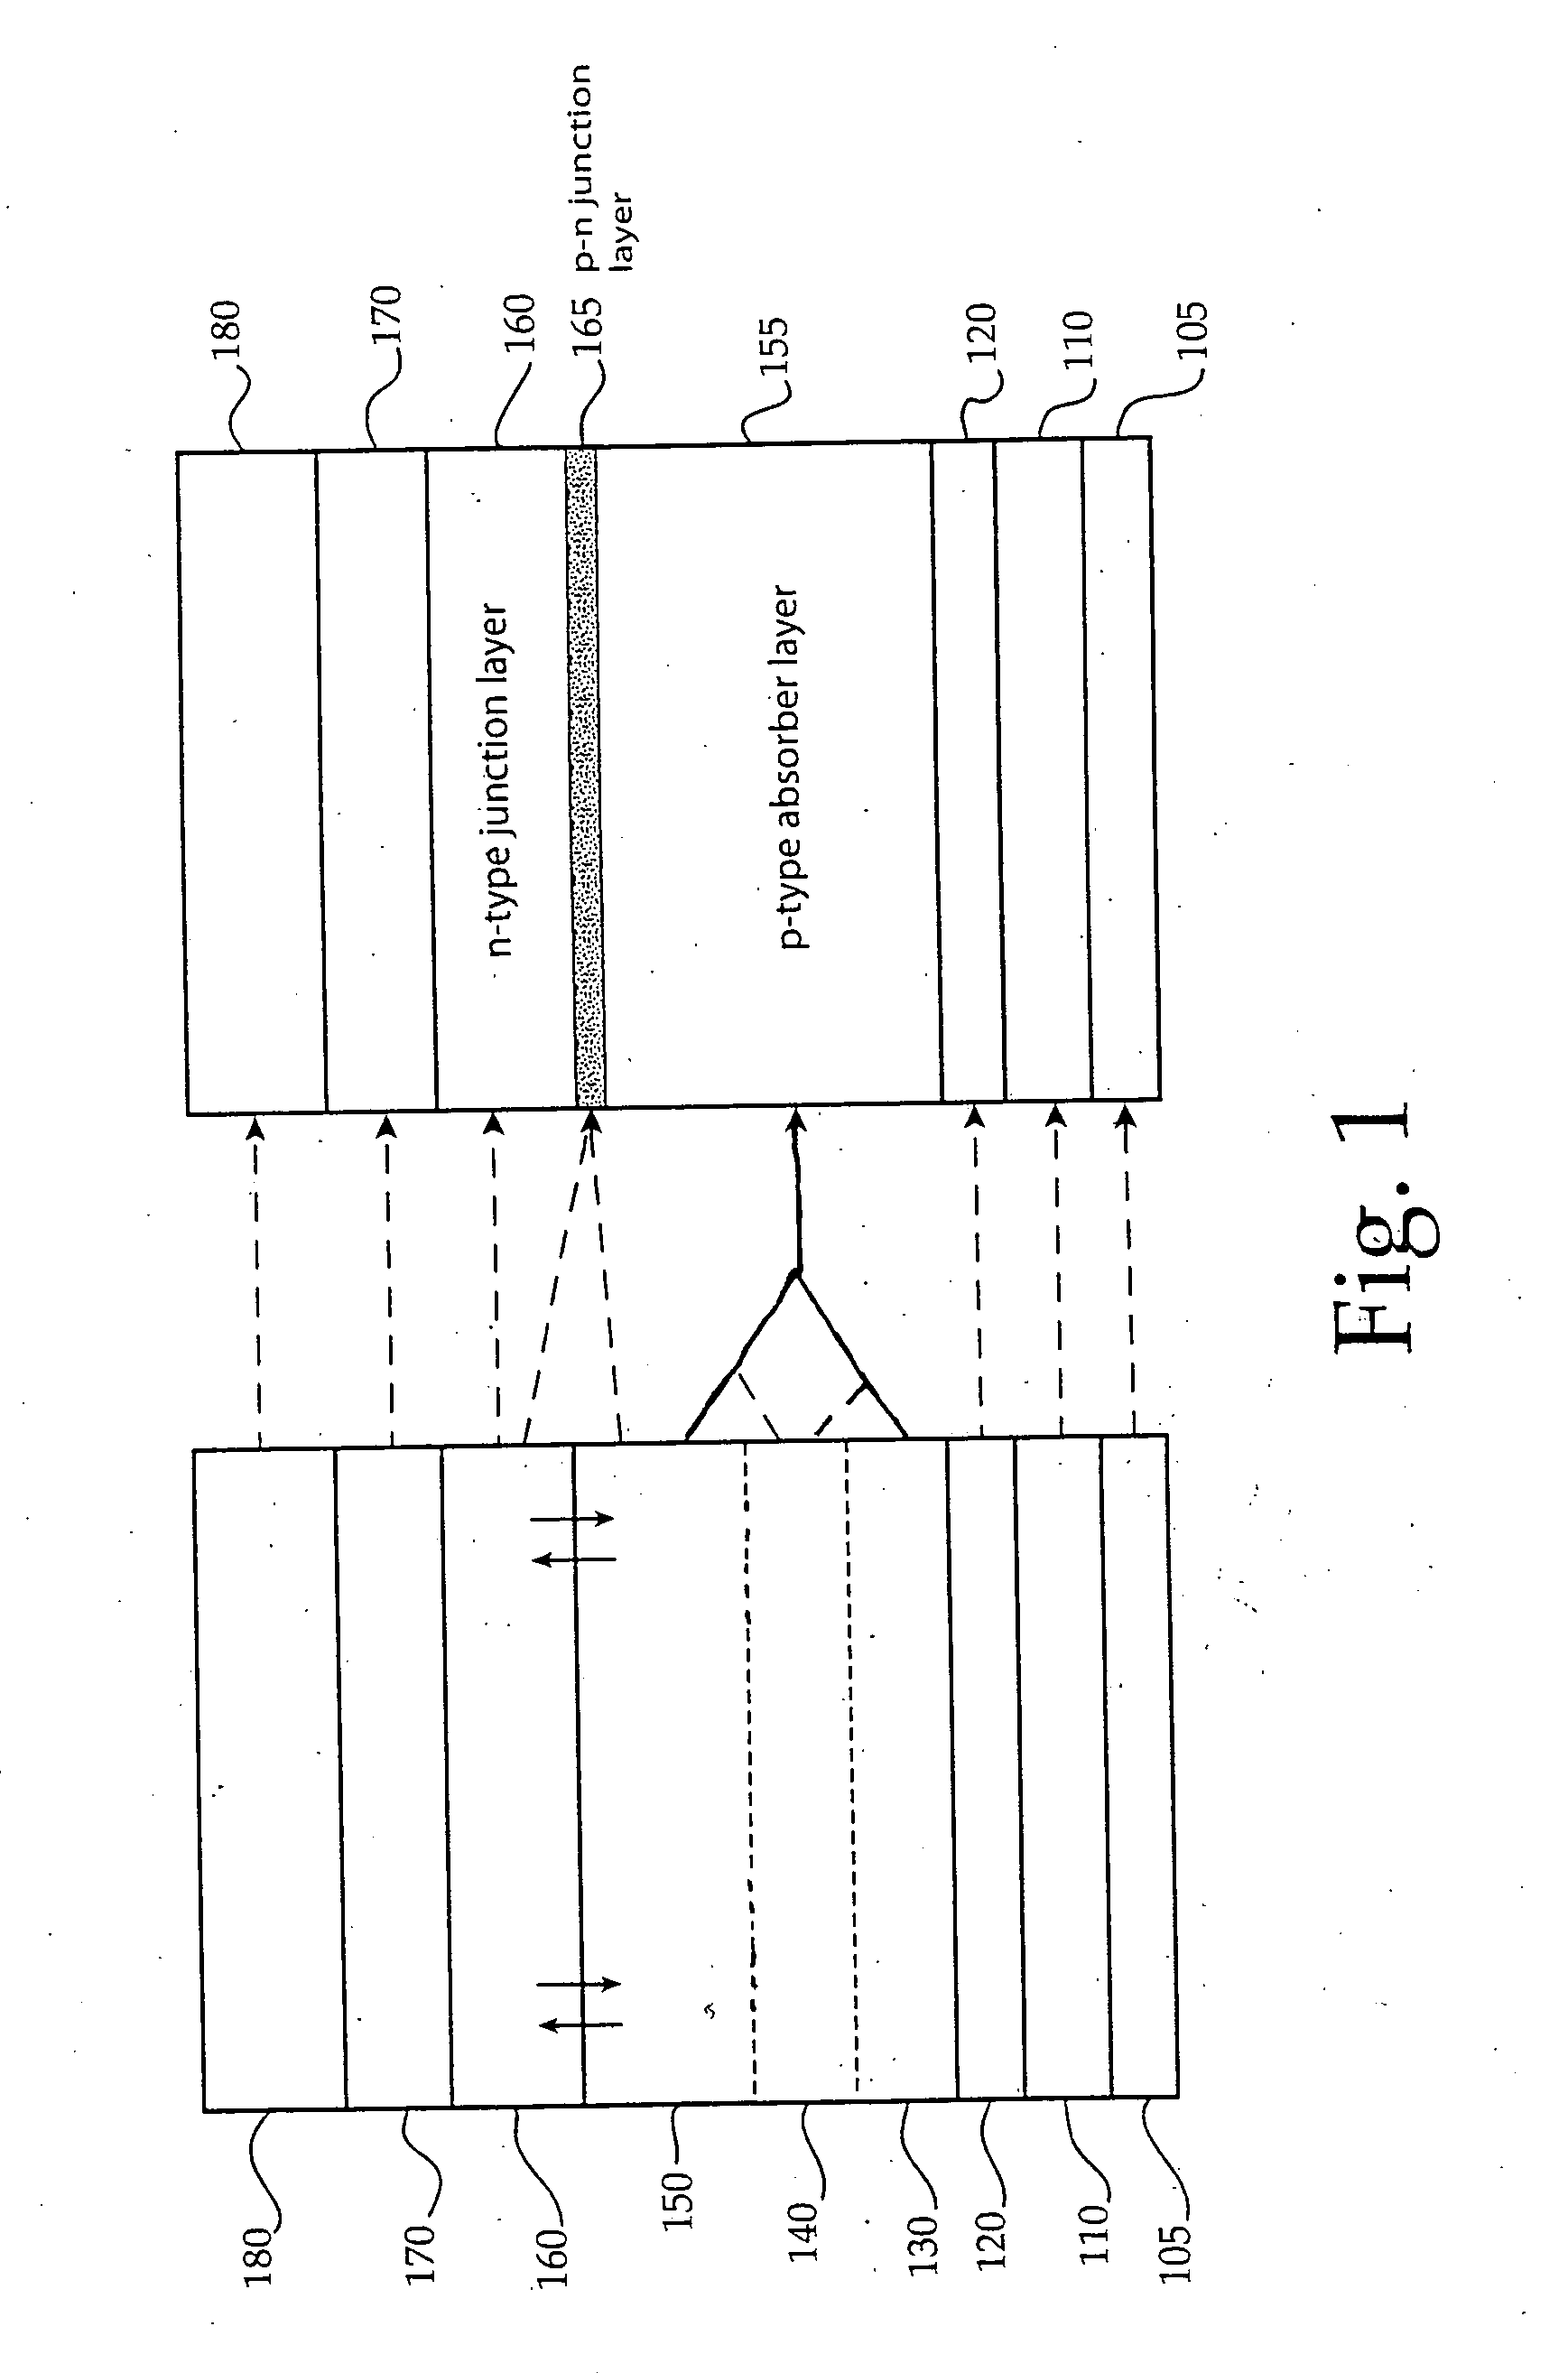 Thermal process for creation of an in-situ junction layer in CIGS